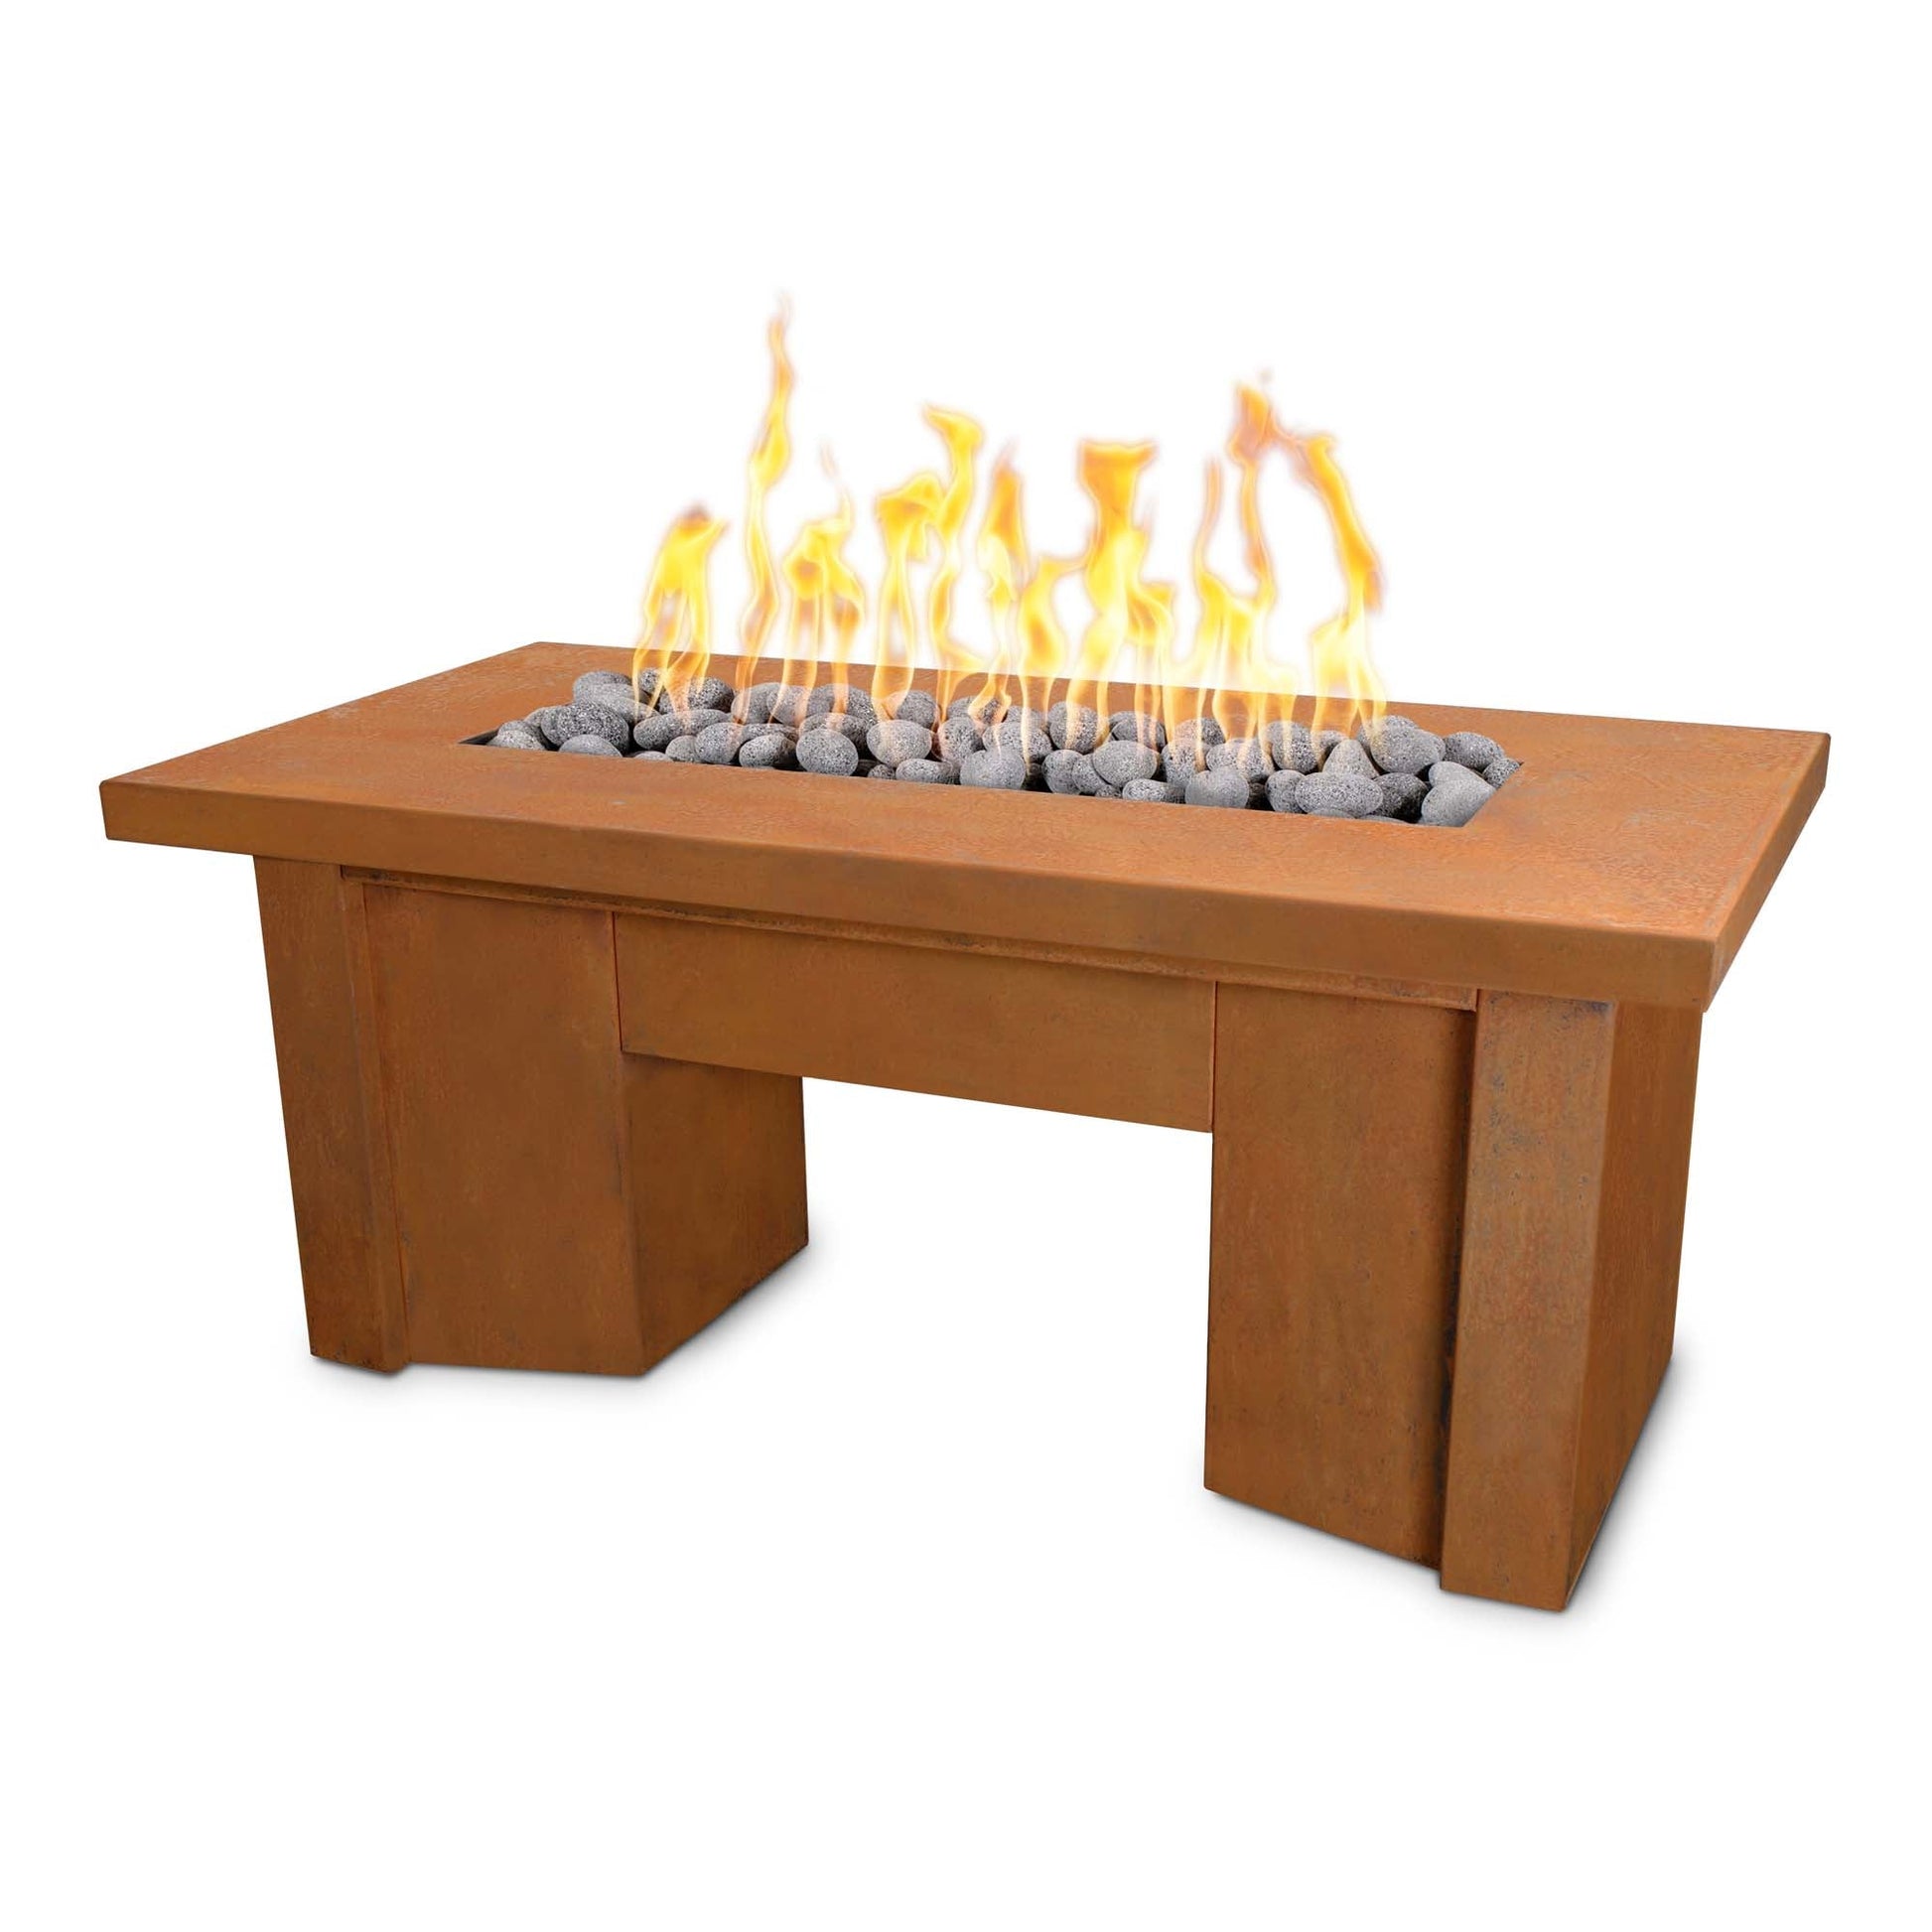 The Outdoor Plus Rectangular Alameda 78" Corten Steel Natural Gas Fire Pit with Match Lit with Flame Sense Ignition